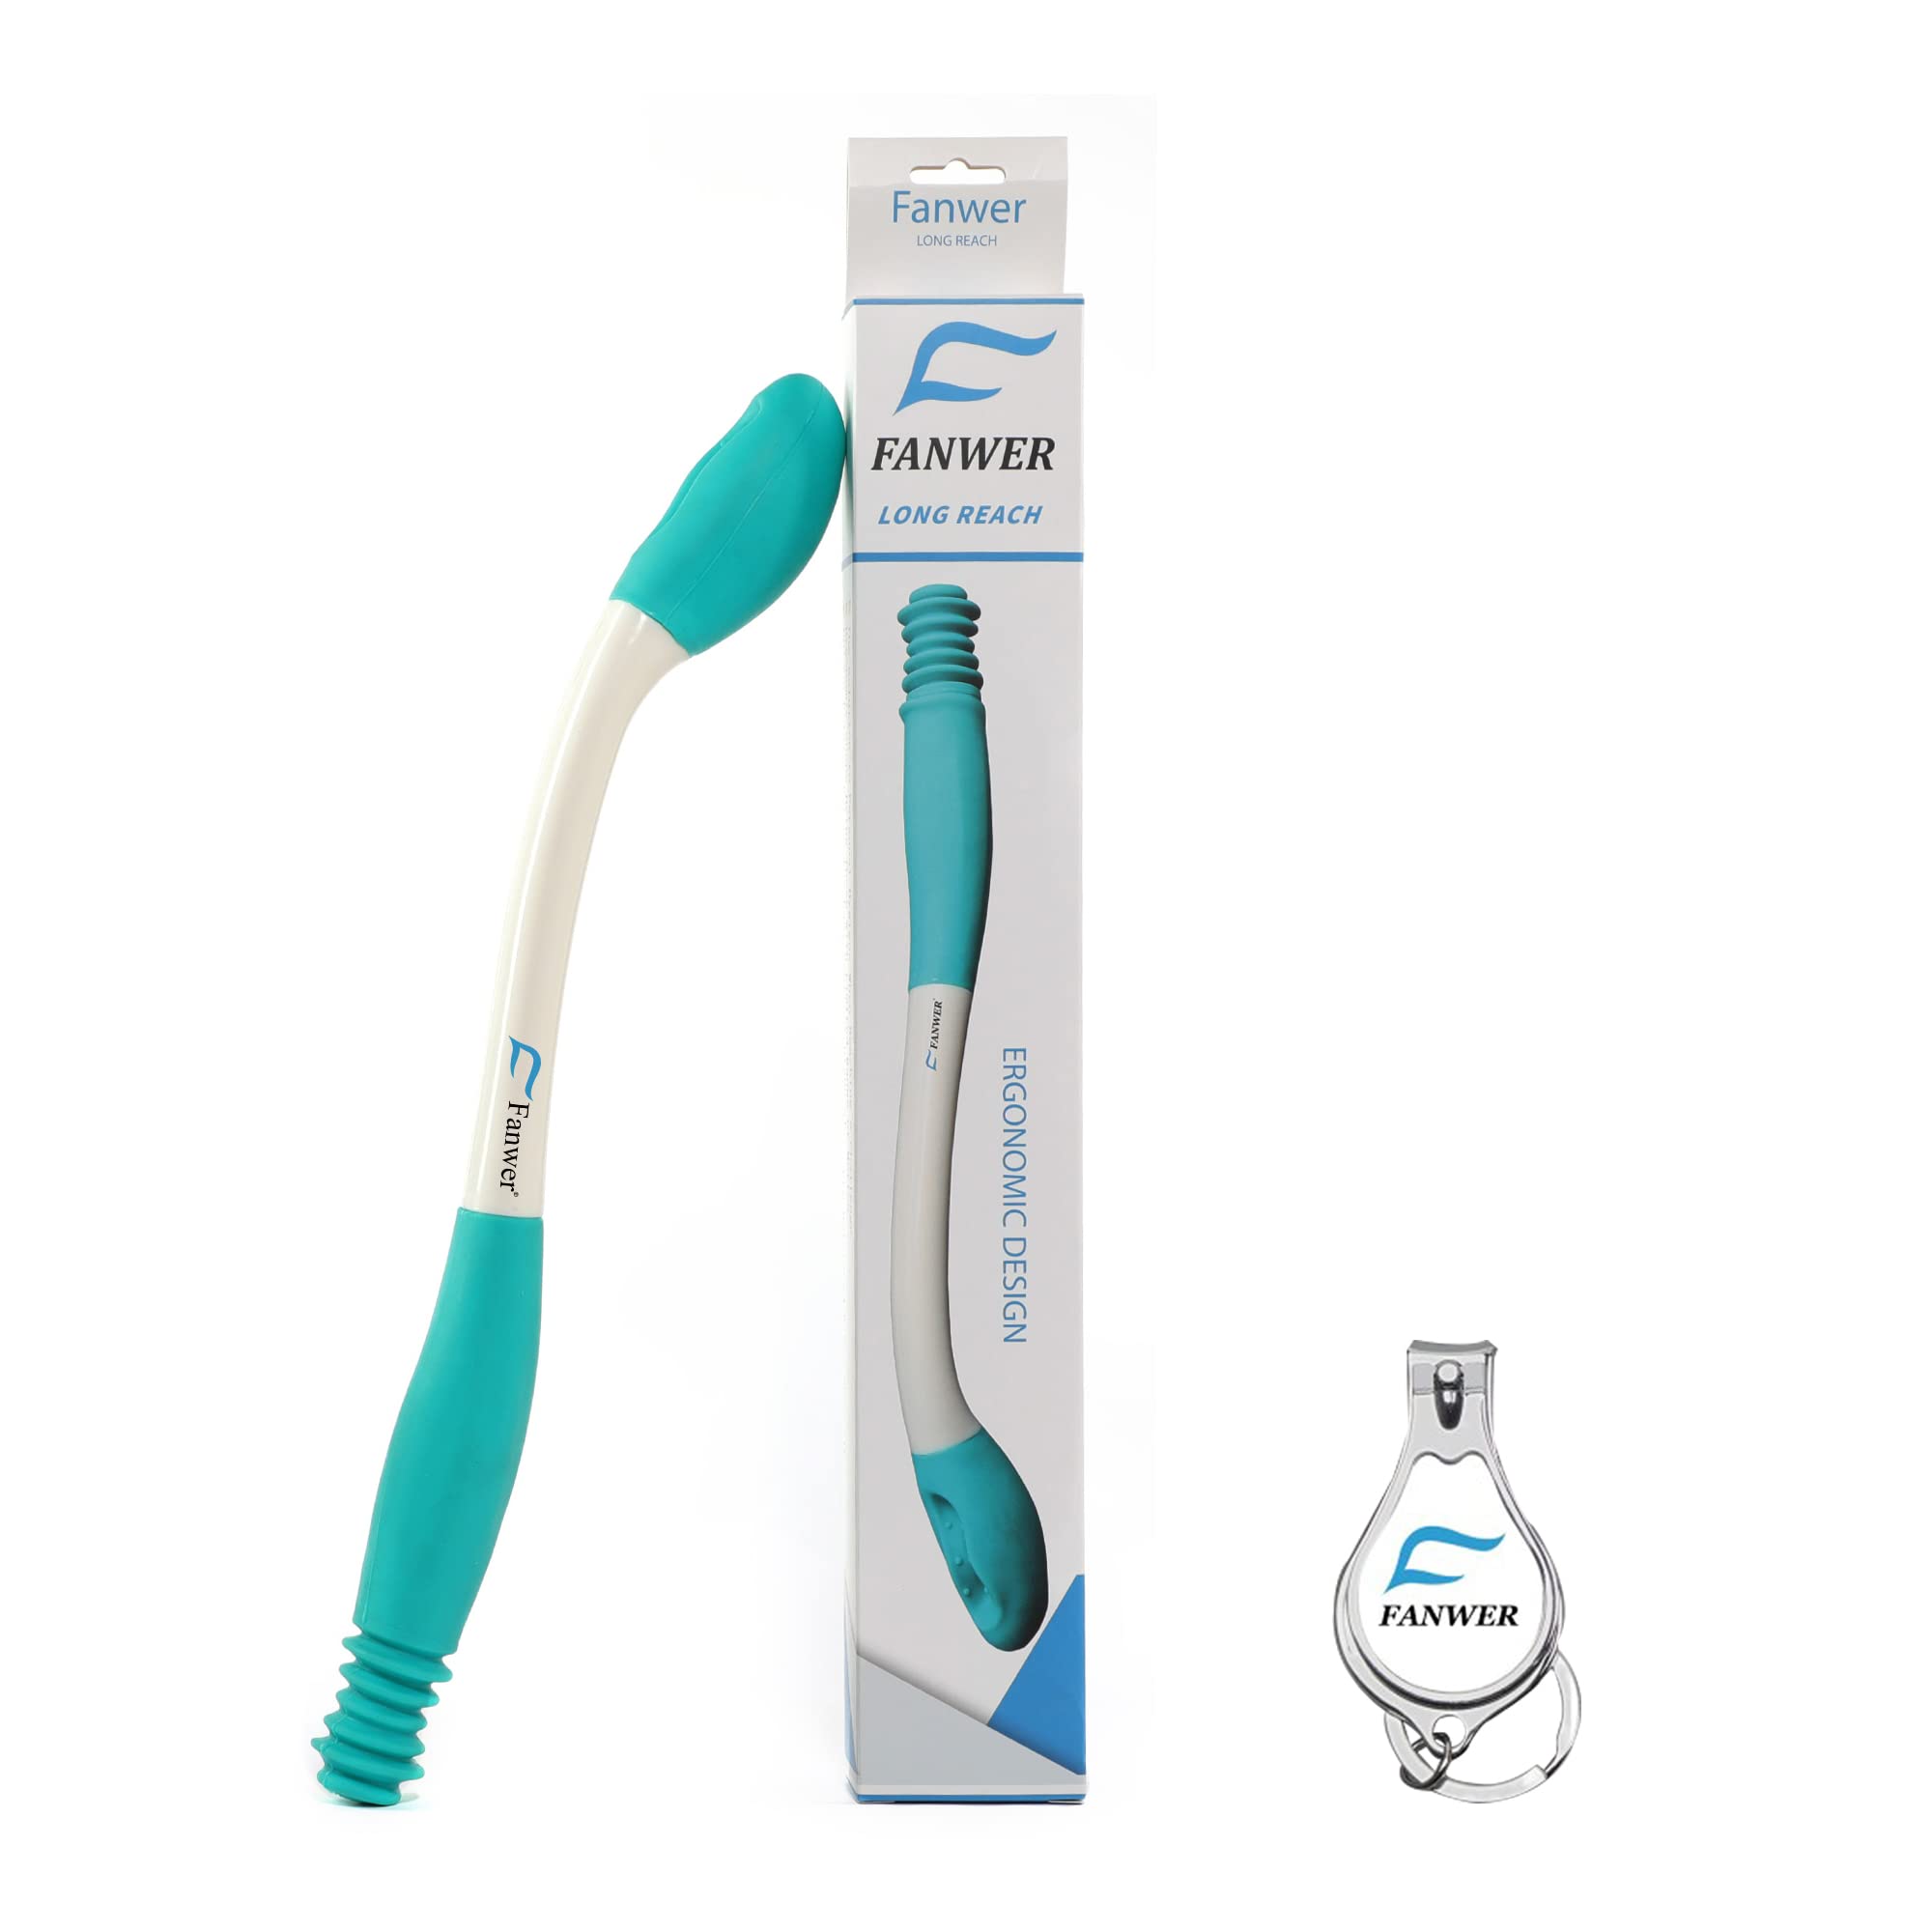 Fanwer Toilet Aids Tools,Long Reach Comfort Wipe,Extends Your Reach Over 15